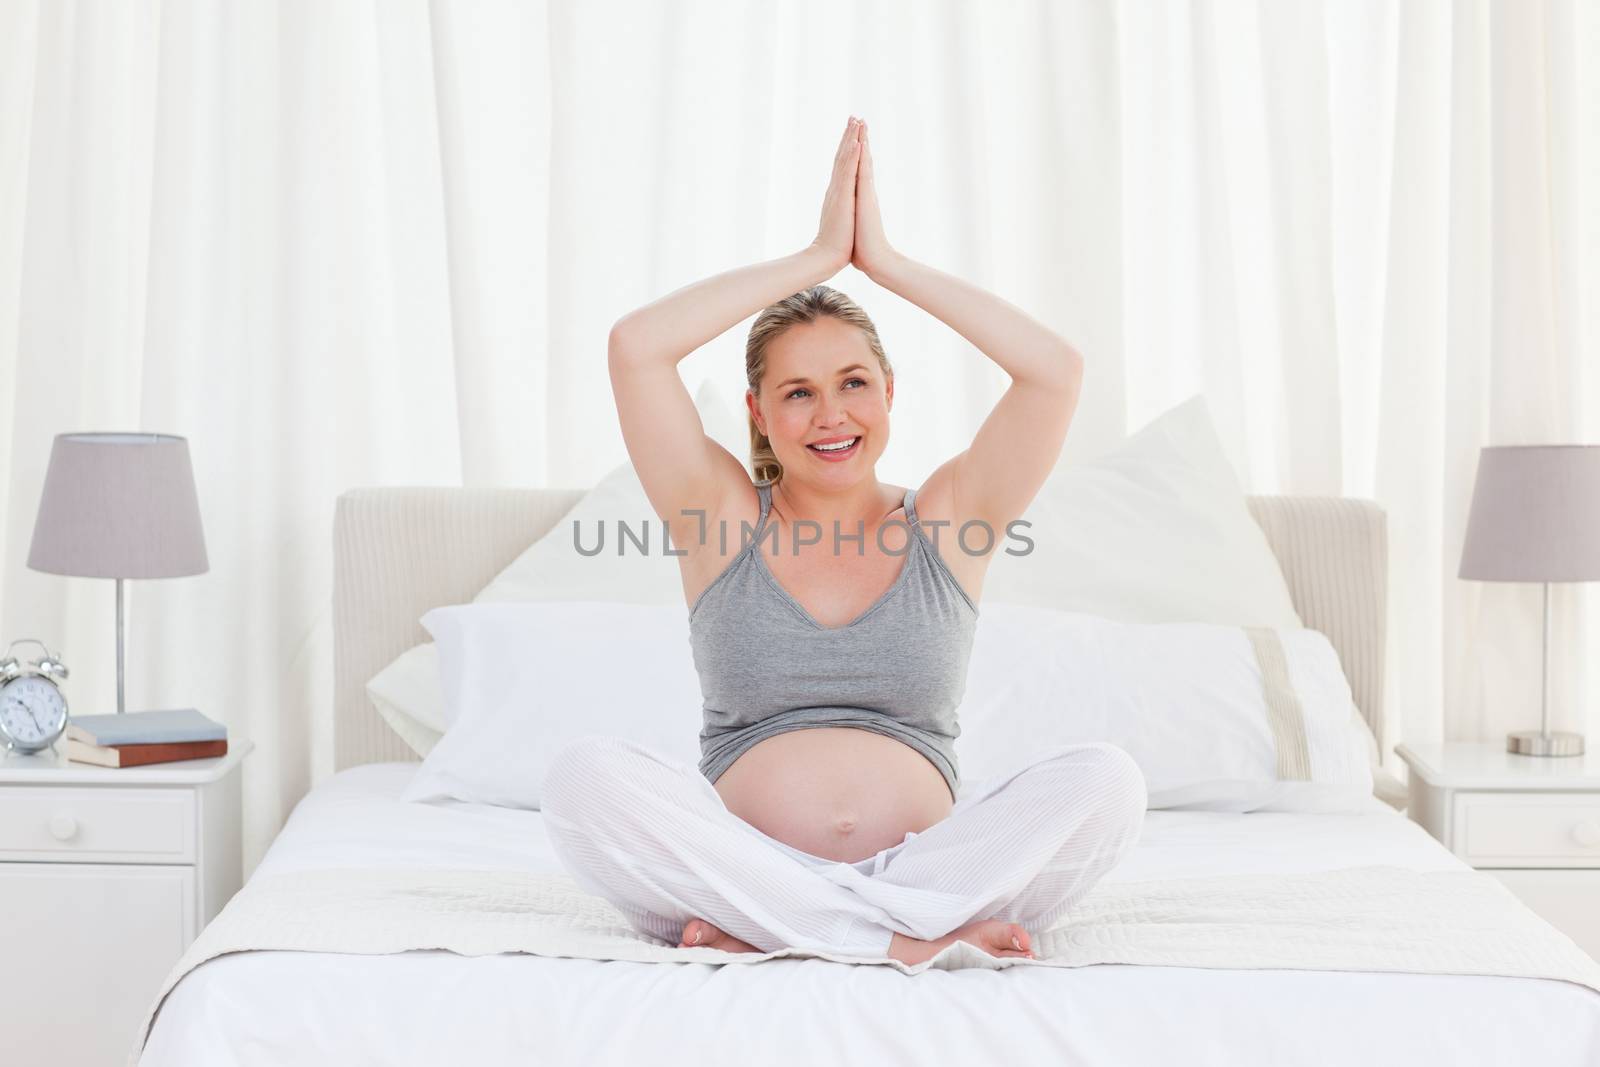 Pregnant woman practicing yoga on her bed by Wavebreakmedia